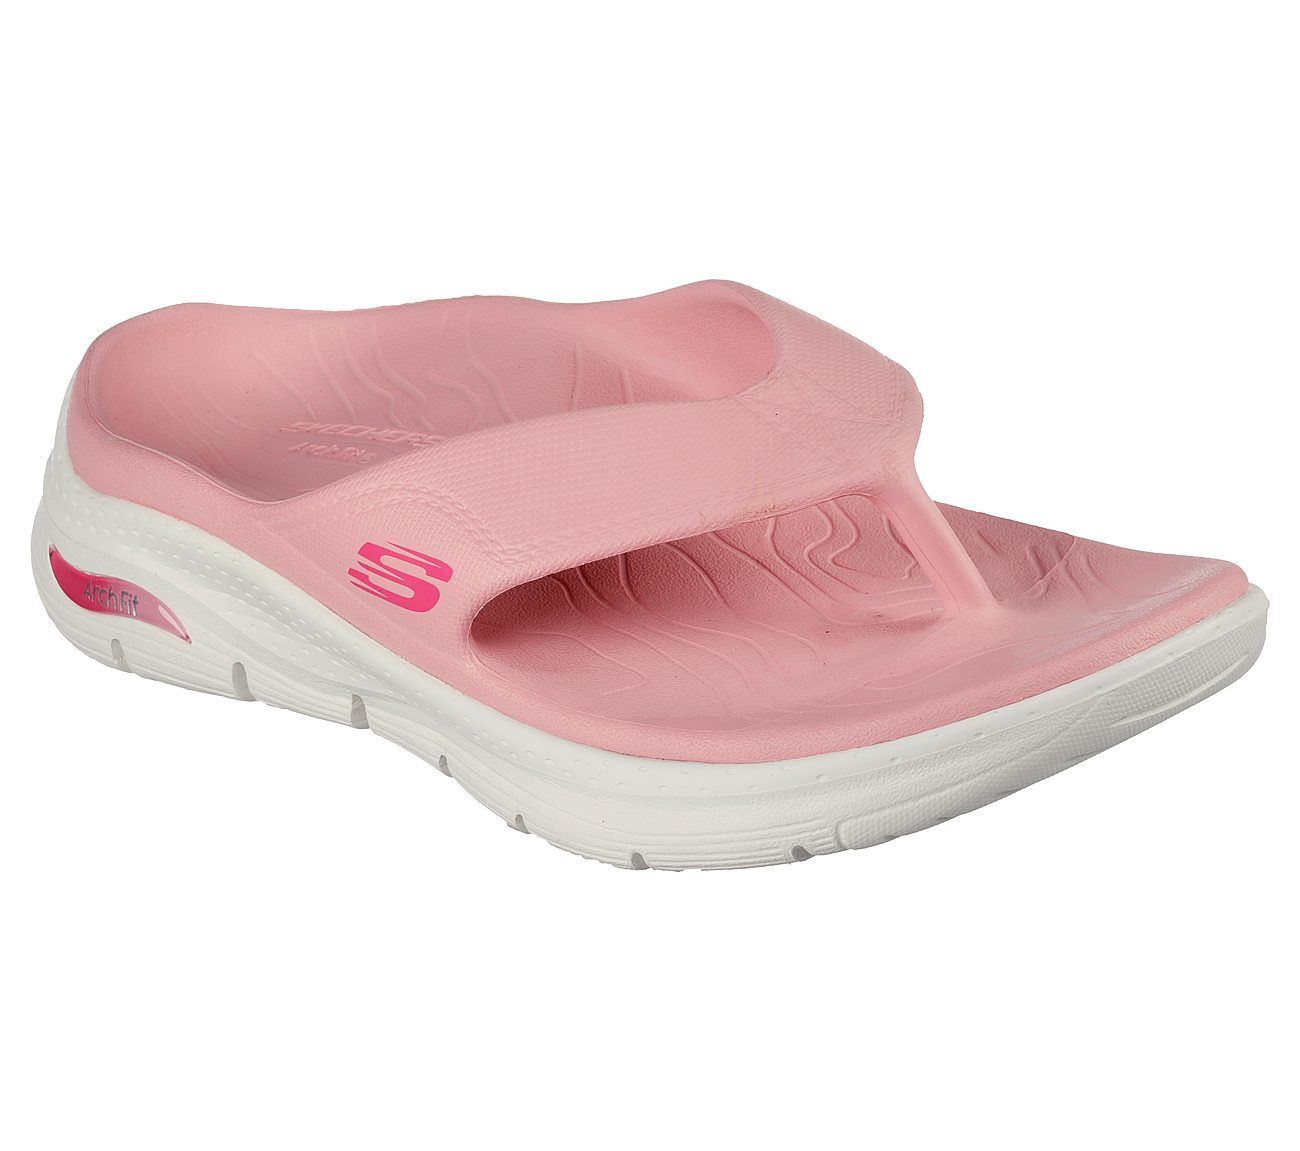 ARCH FIT FOAMIES - LIFESTYLE, LLLIGHT PINK Footwear Right View